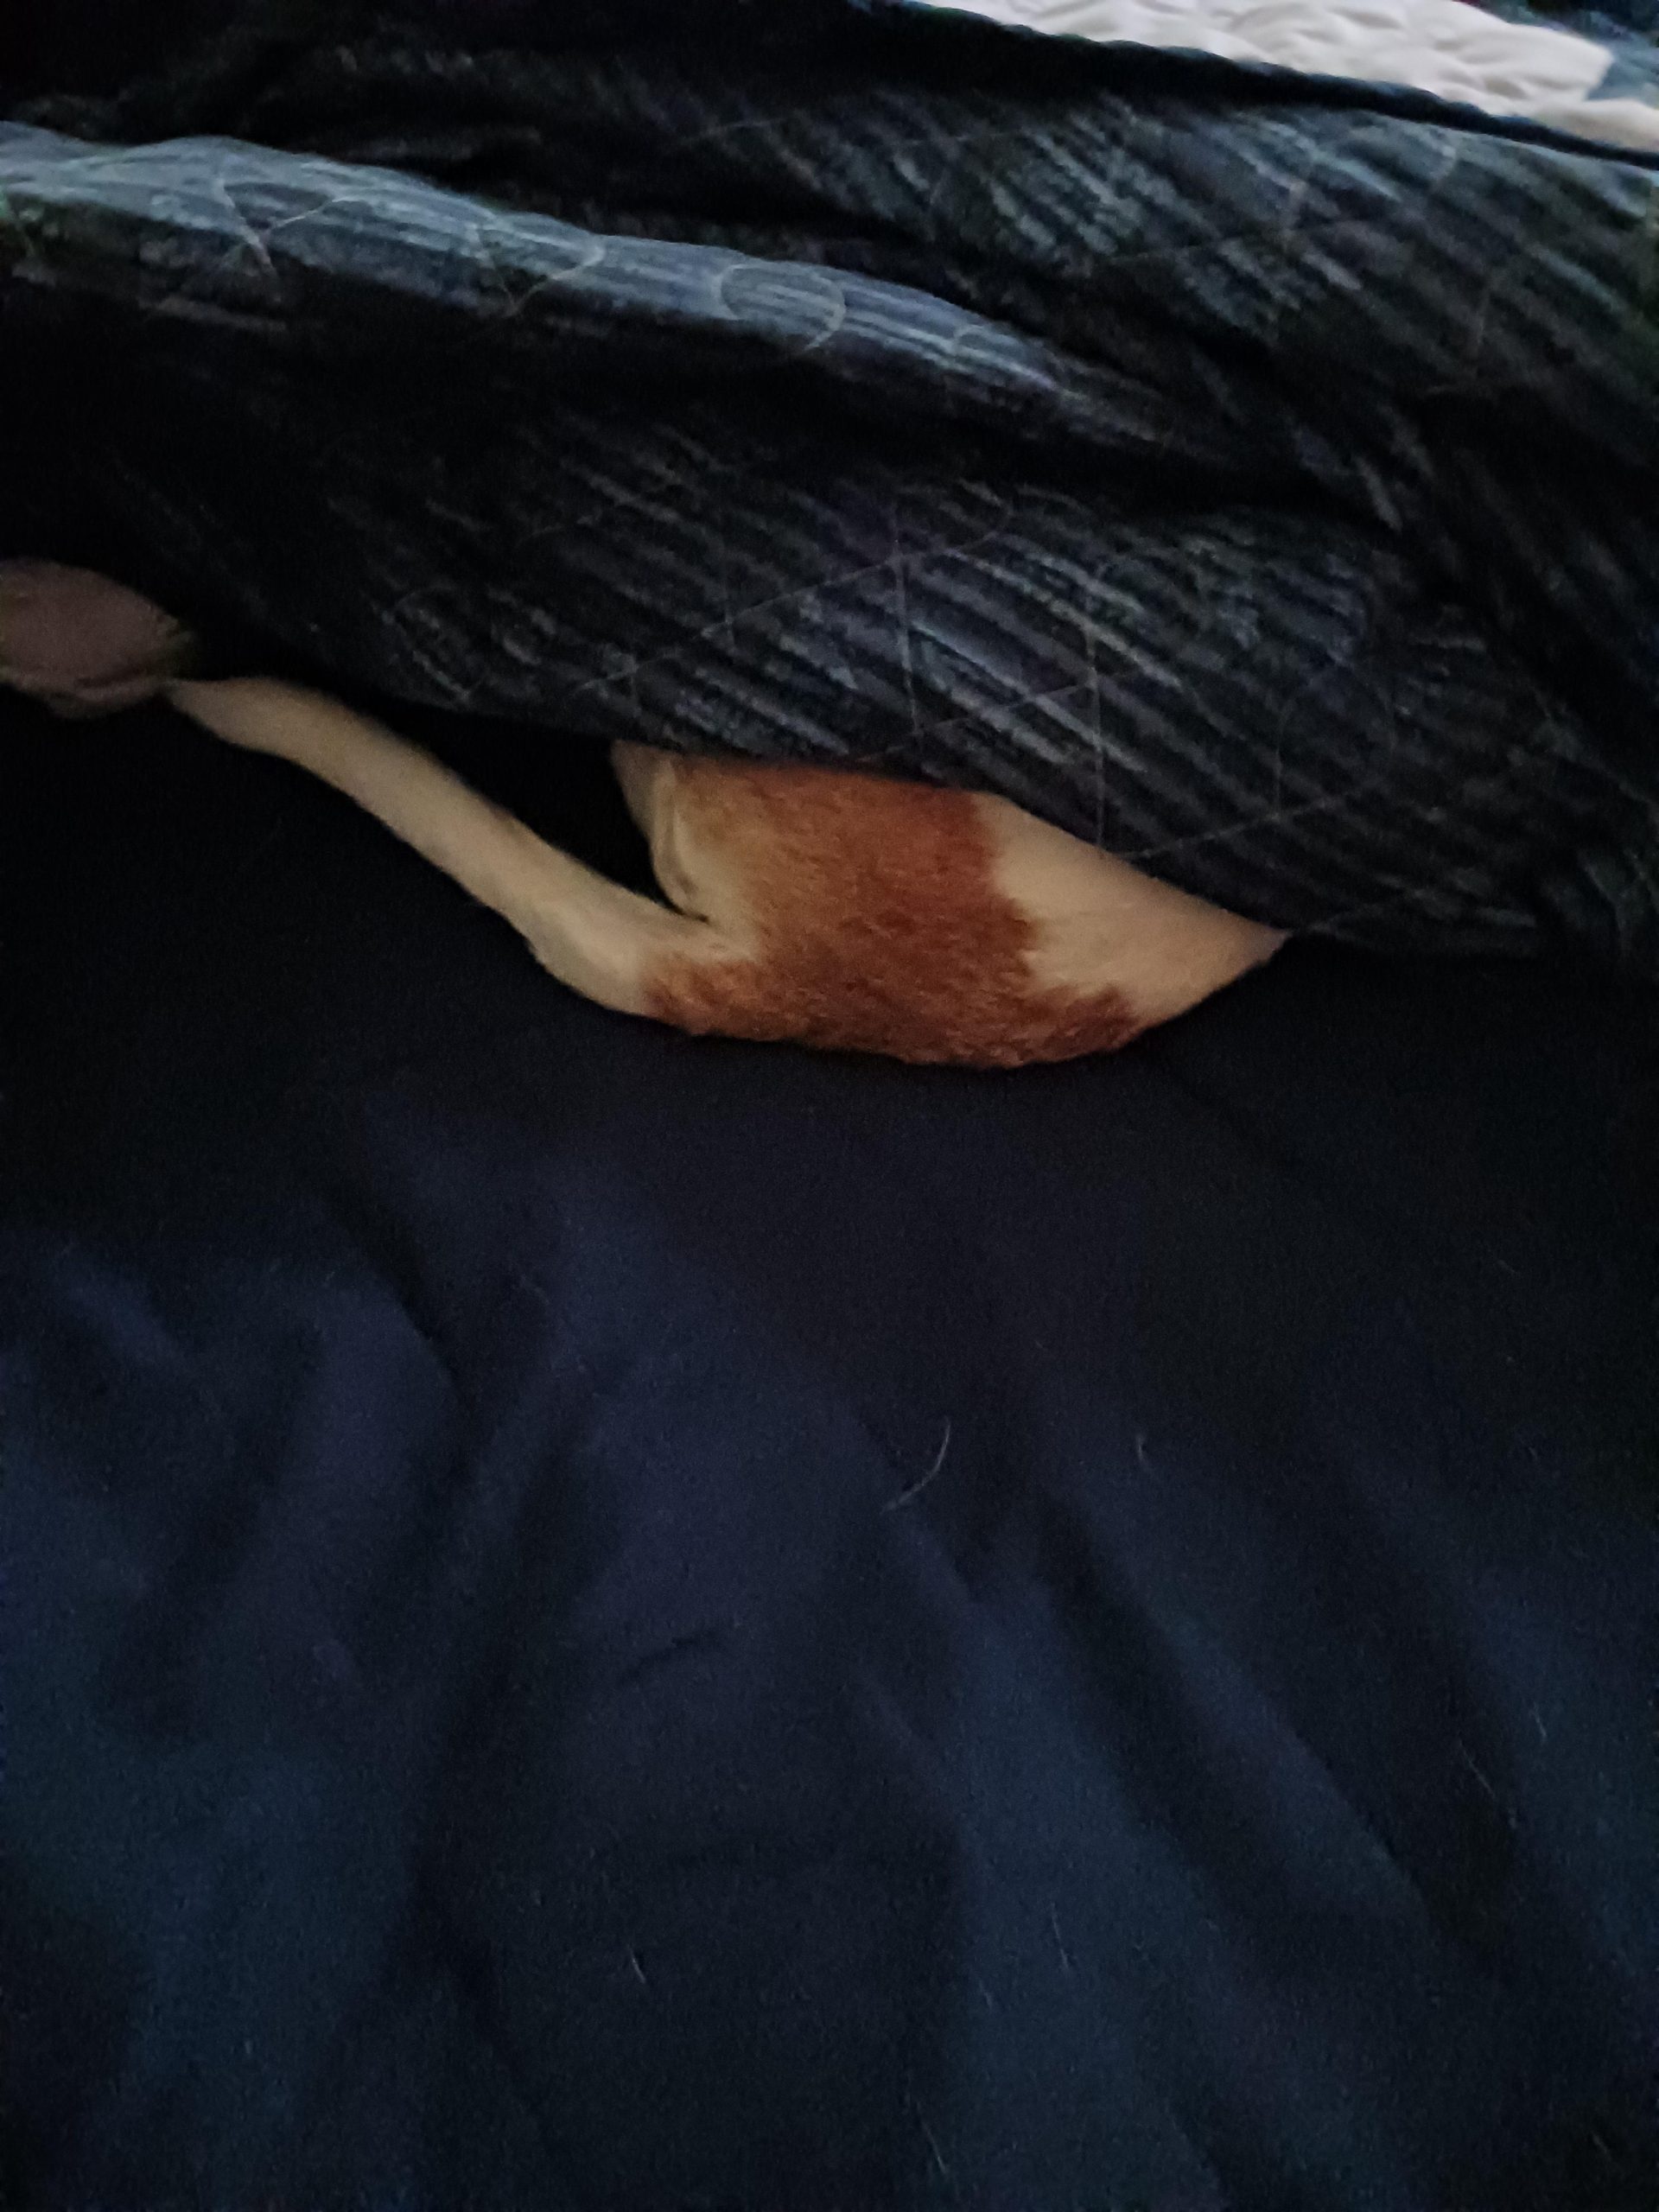 Fine morning from dog butt.